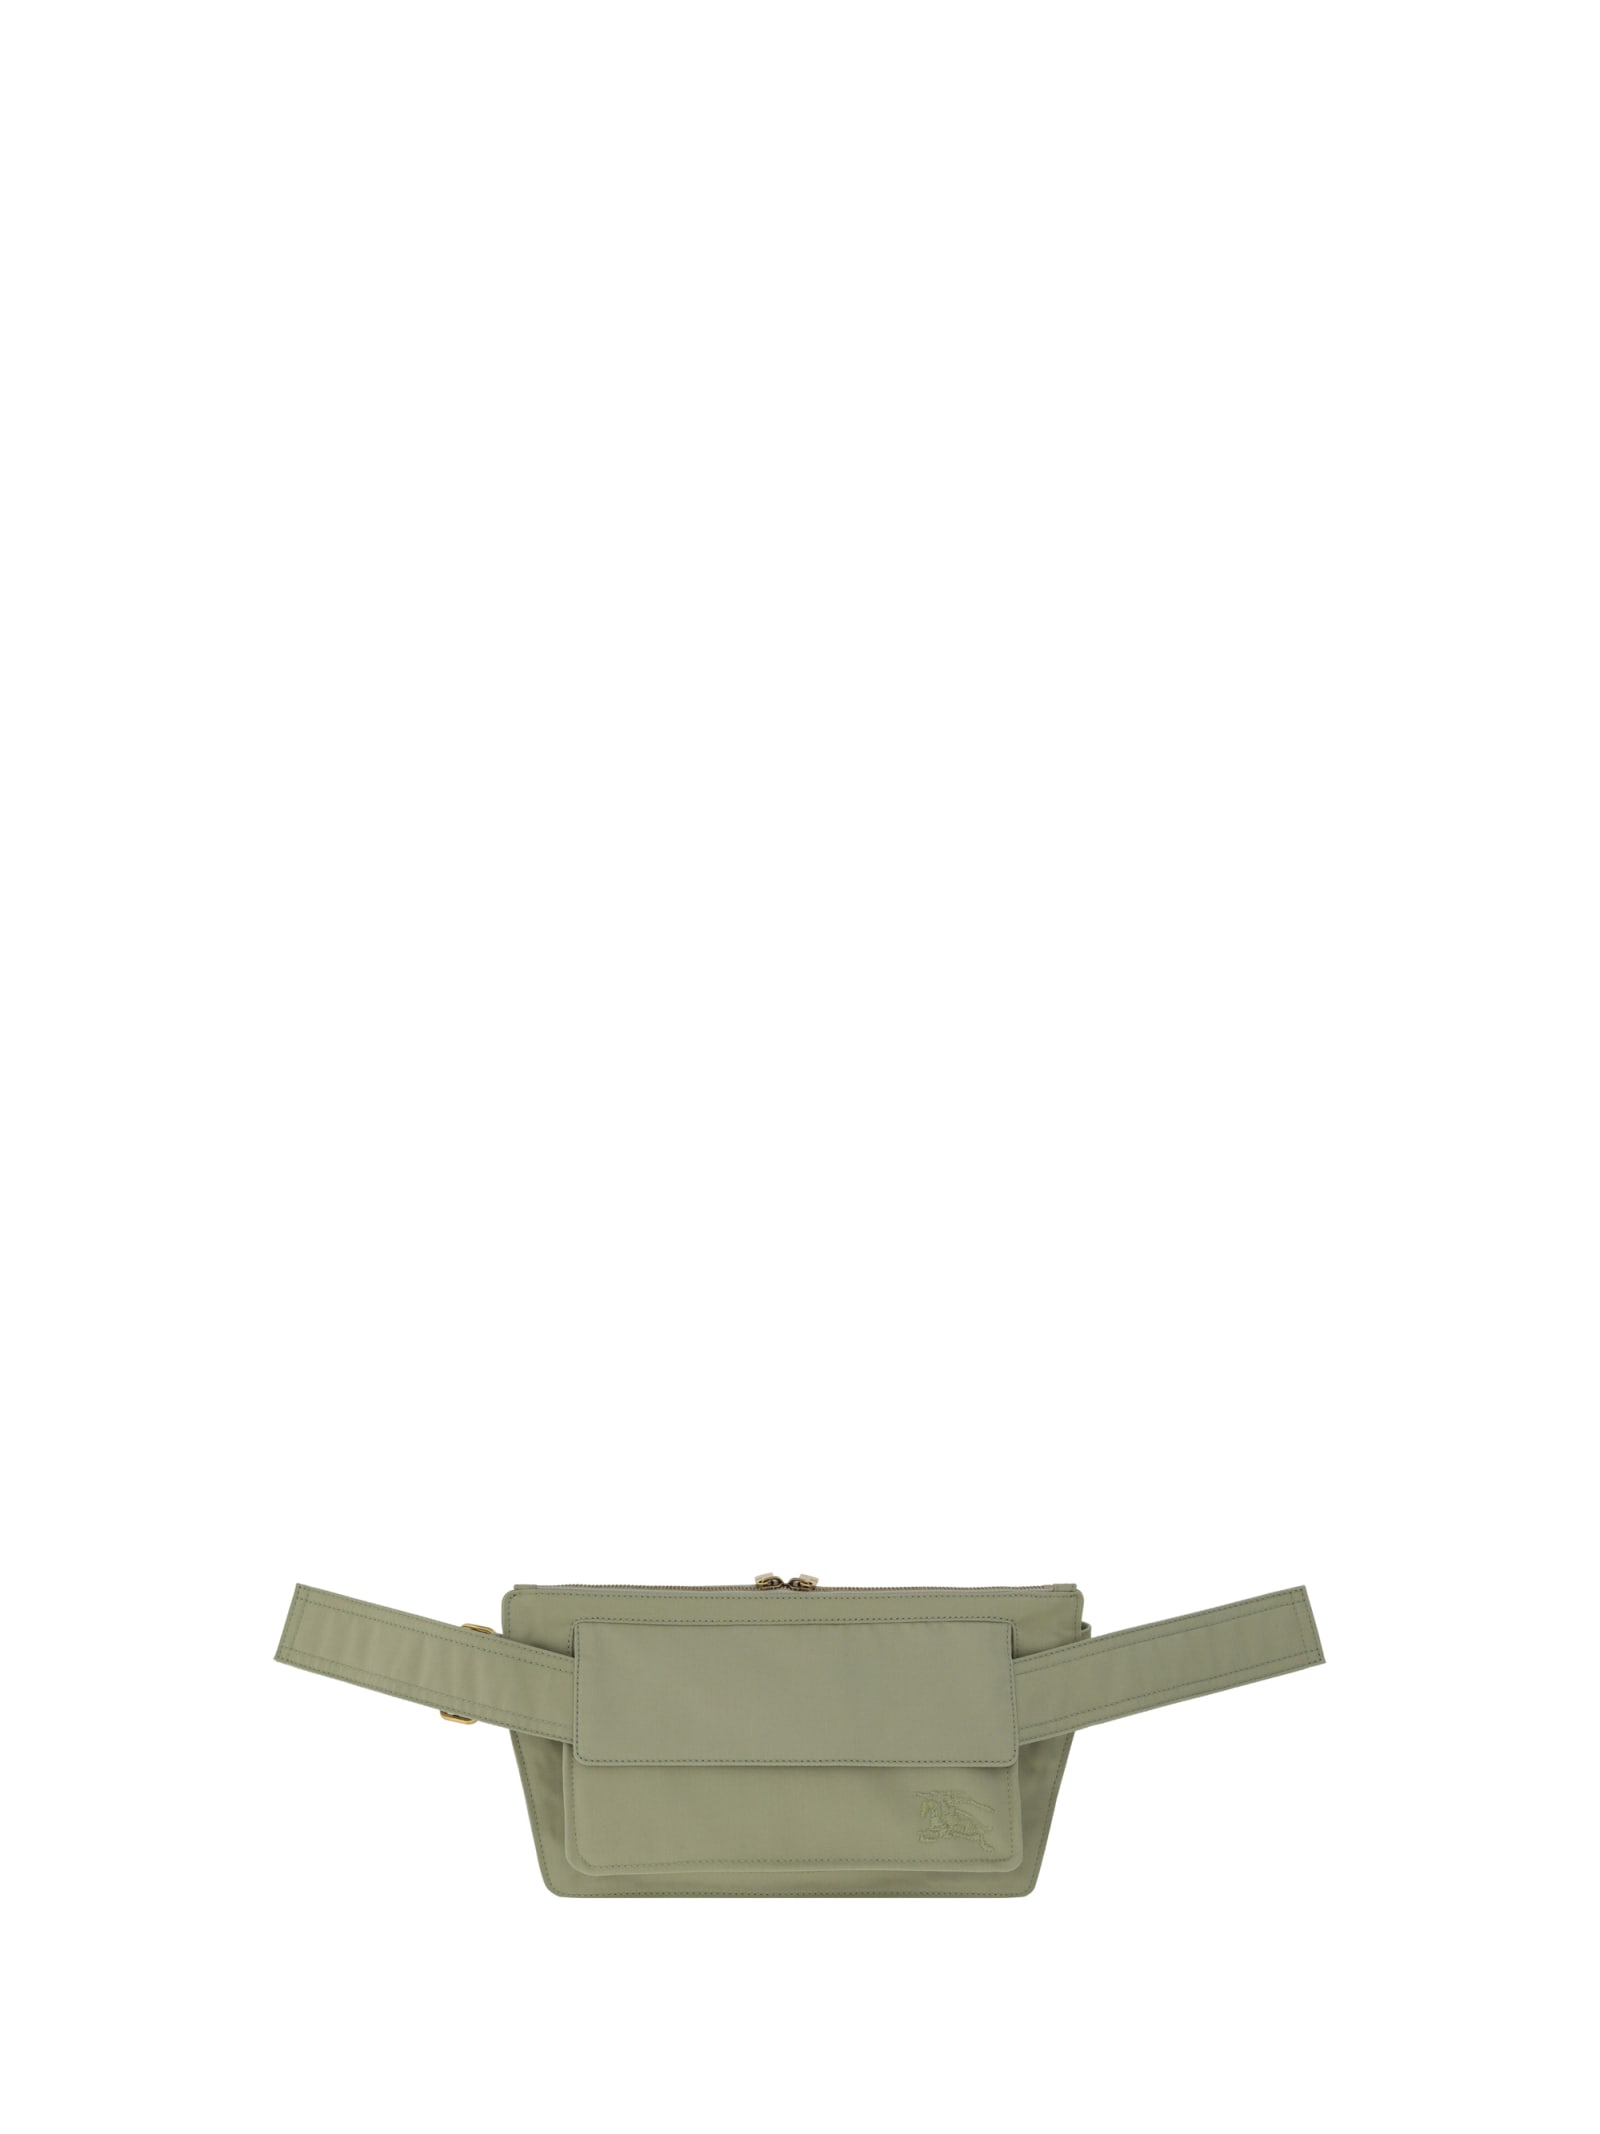 Burberry Trench Fanny Pack In Hunter